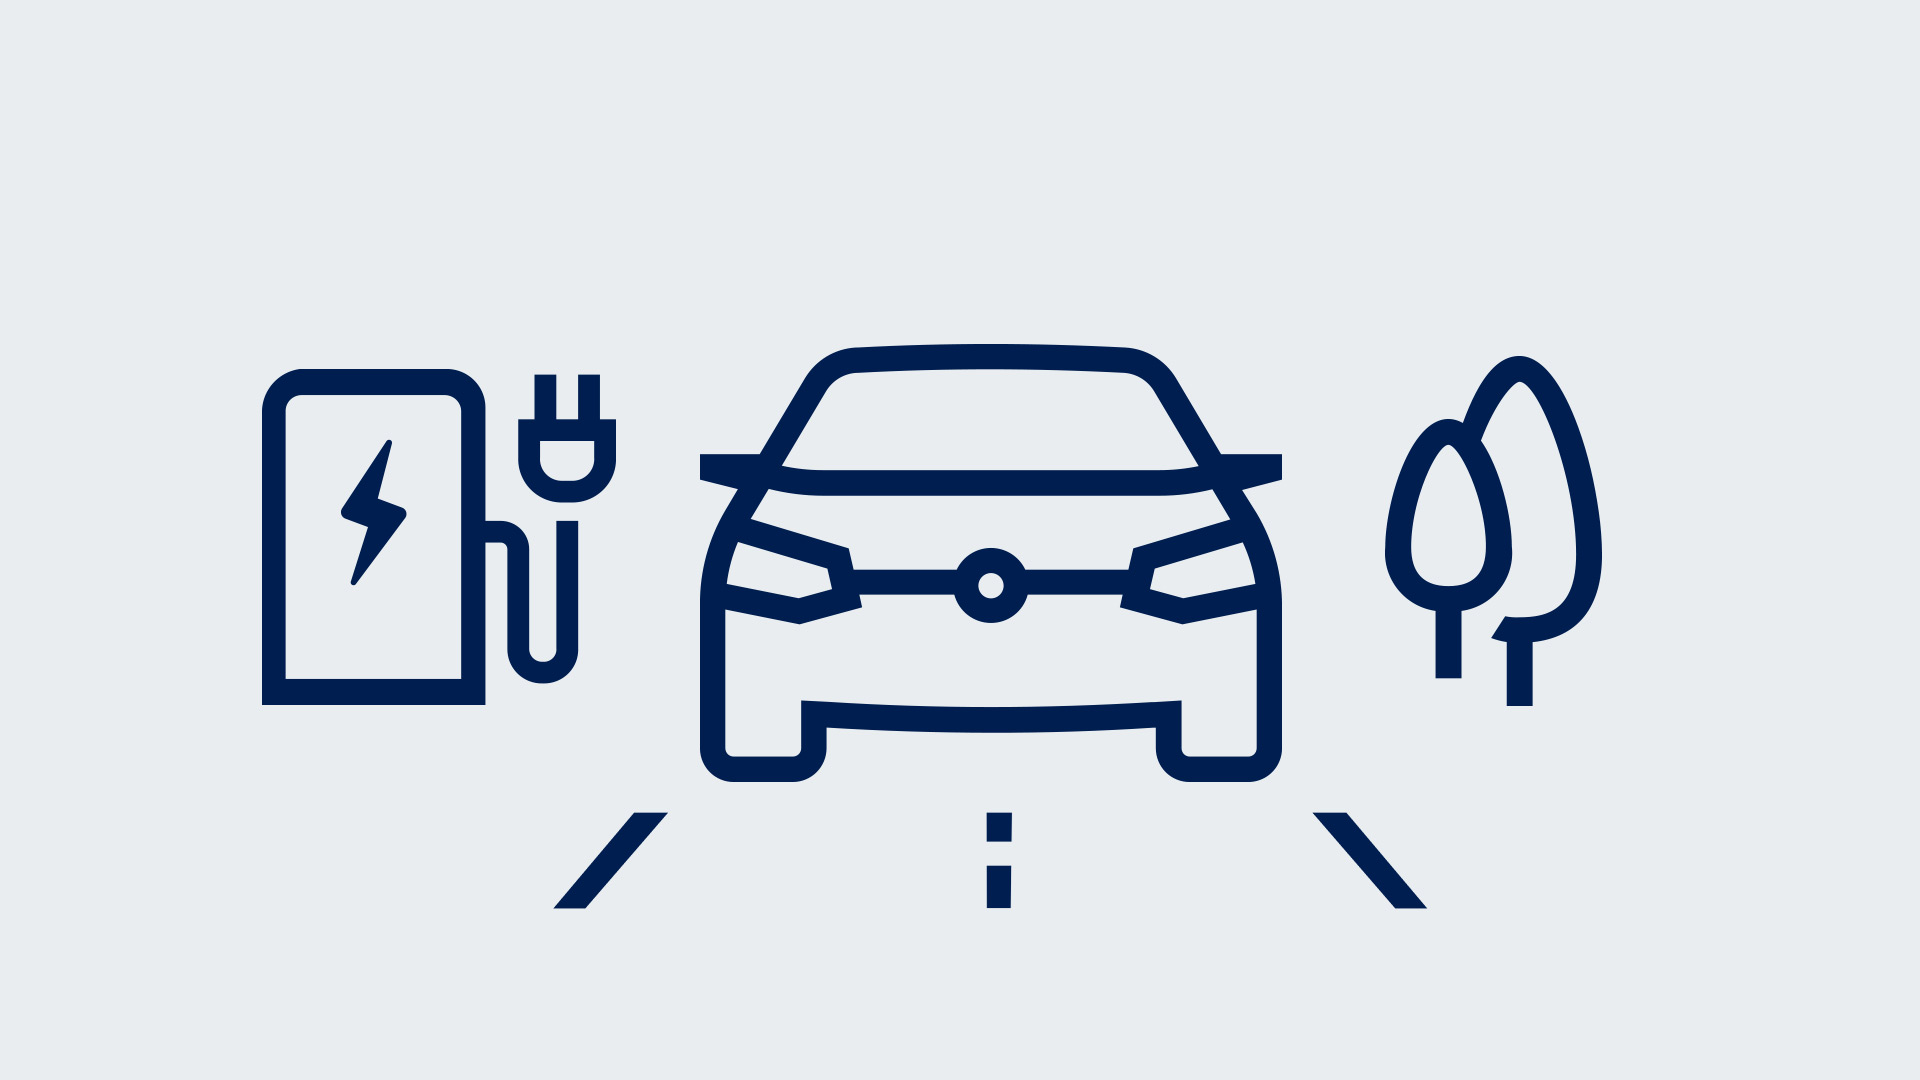 An image that shows an icon of a car on the road passing by tree icons with an electric symbol floating to the side.